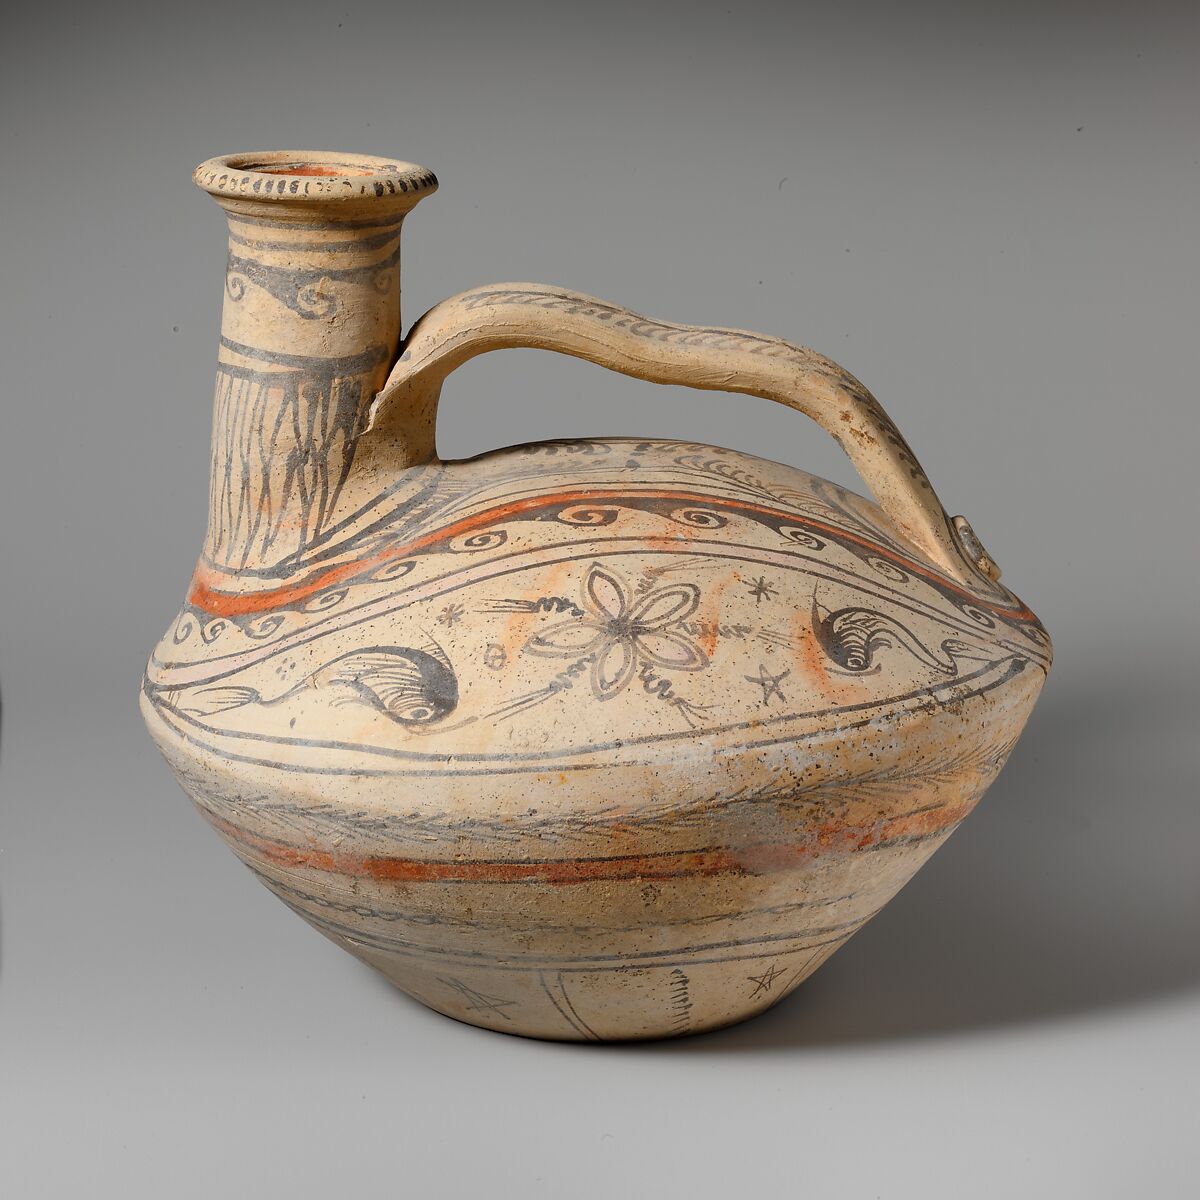 Terracotta askos (flask with a spout and handle over the top), Terracotta, Native Italian, Daunian, Canosan 